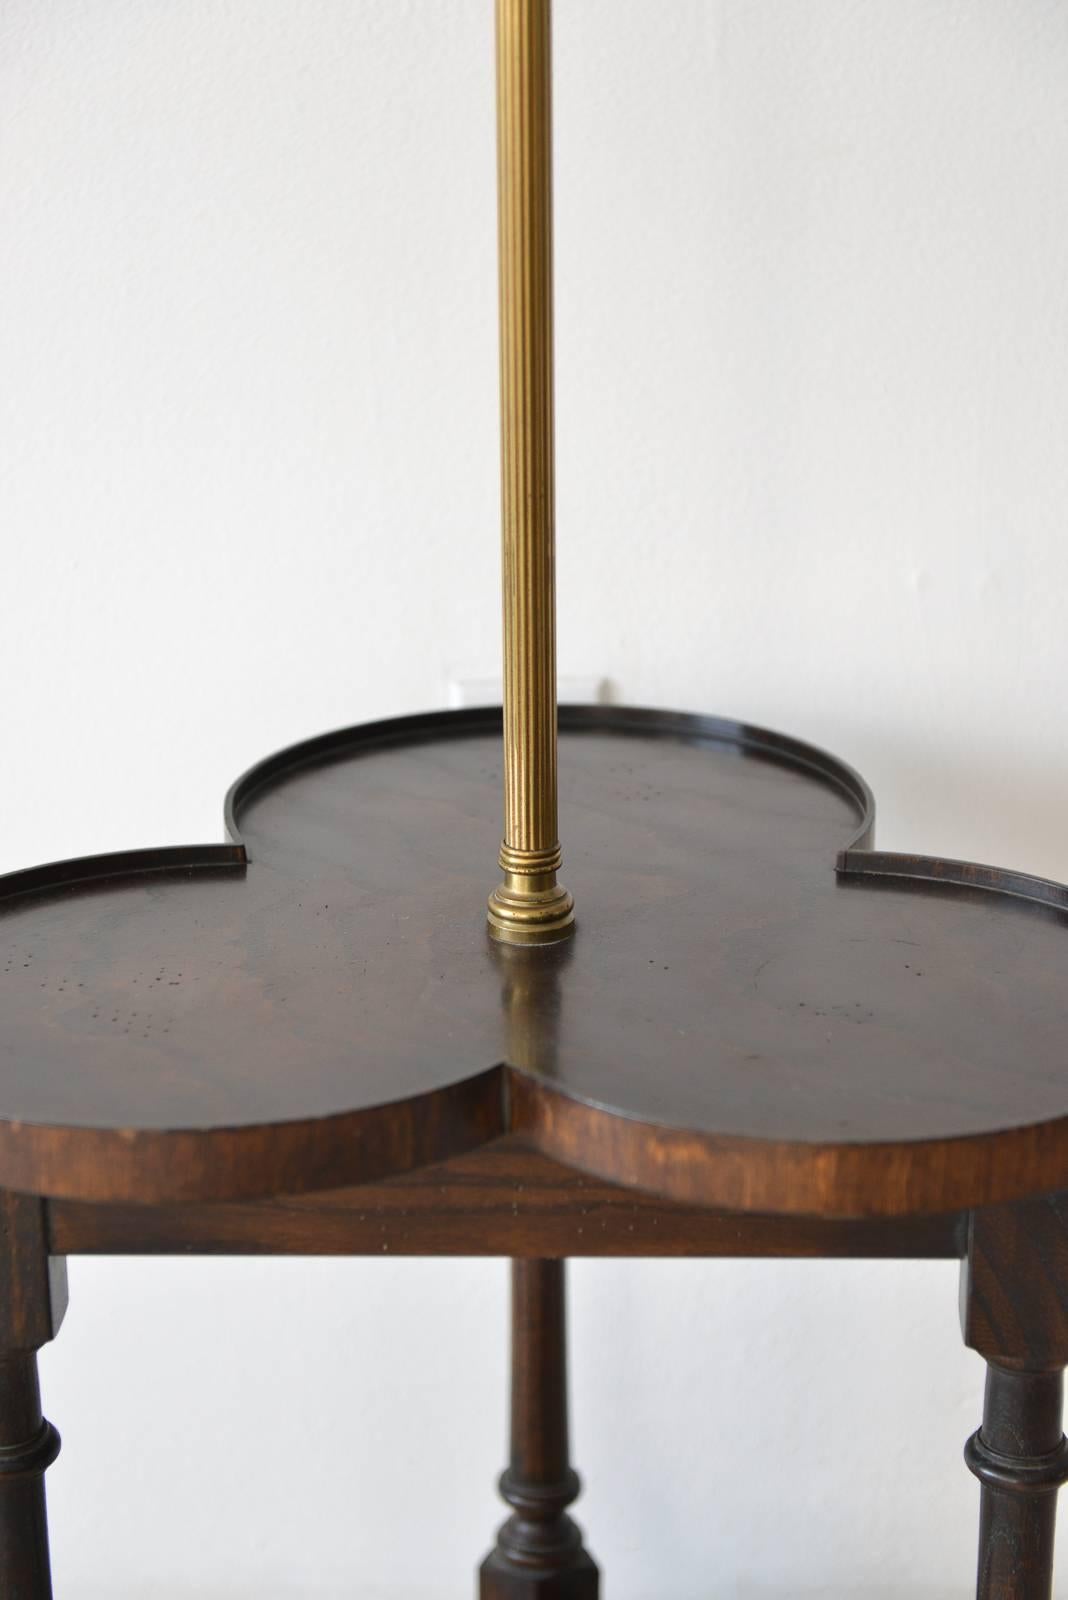 American Classical Tripod Base Clover Floor Lamp with Table by Frederick Cooper, circa 1950